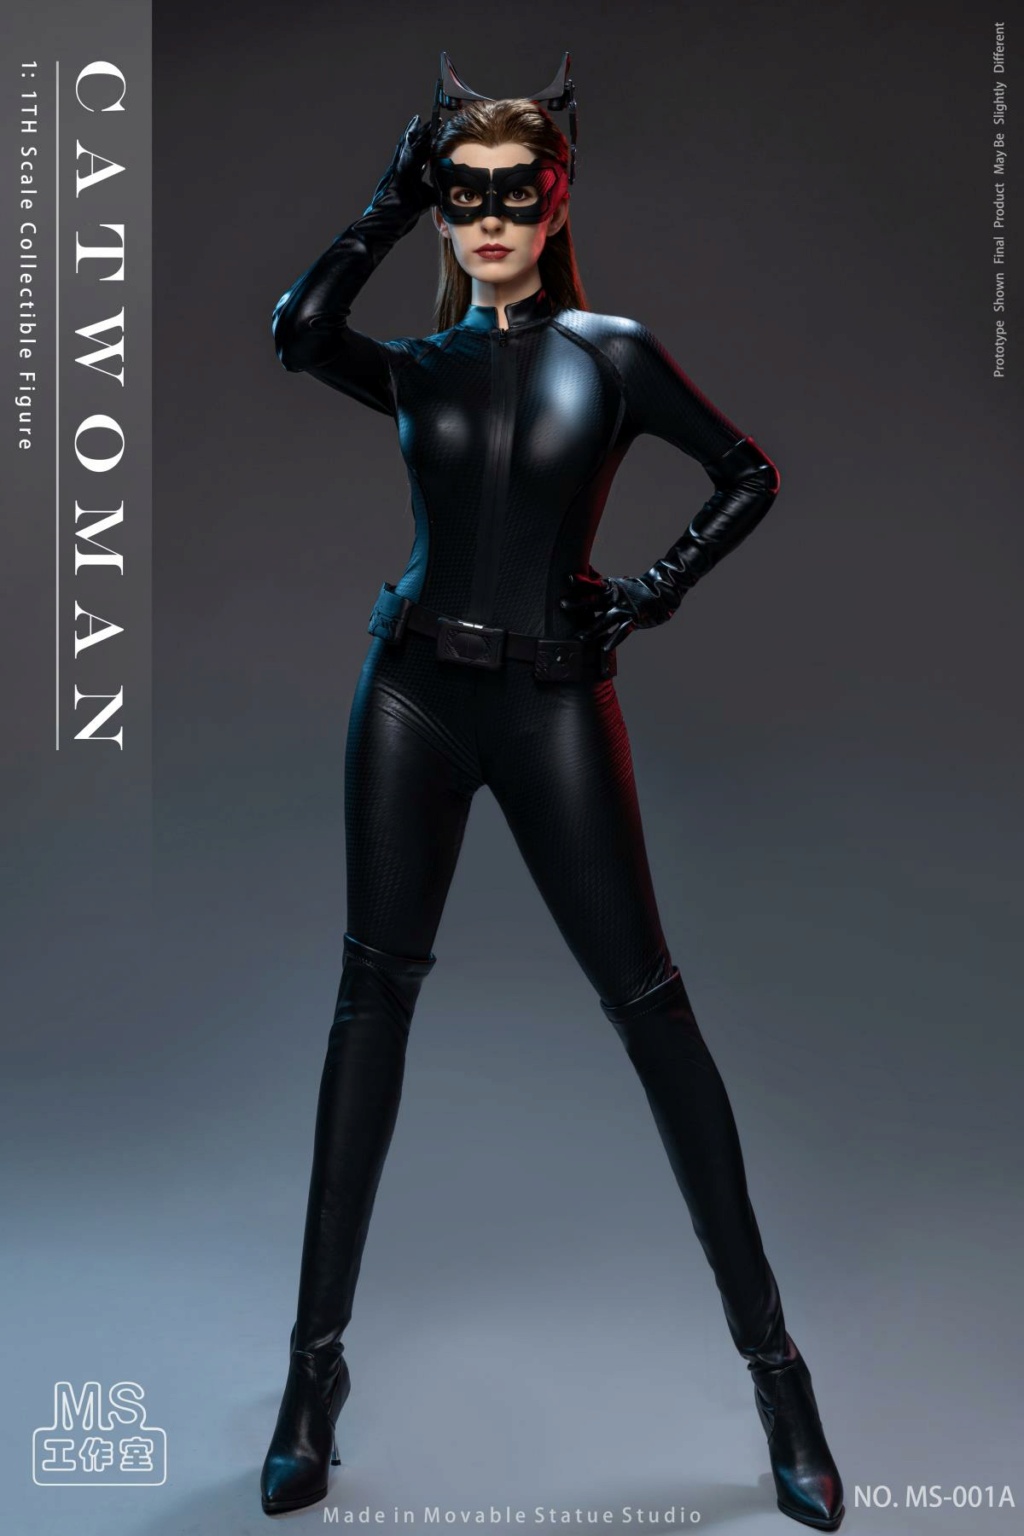 Female - NEW PRODUCT: MS Studio: Catwoman Movie Version 1/1 Proportion Catwoman Cherished Movable Figure “ Grand ” Age MS-001A 16142